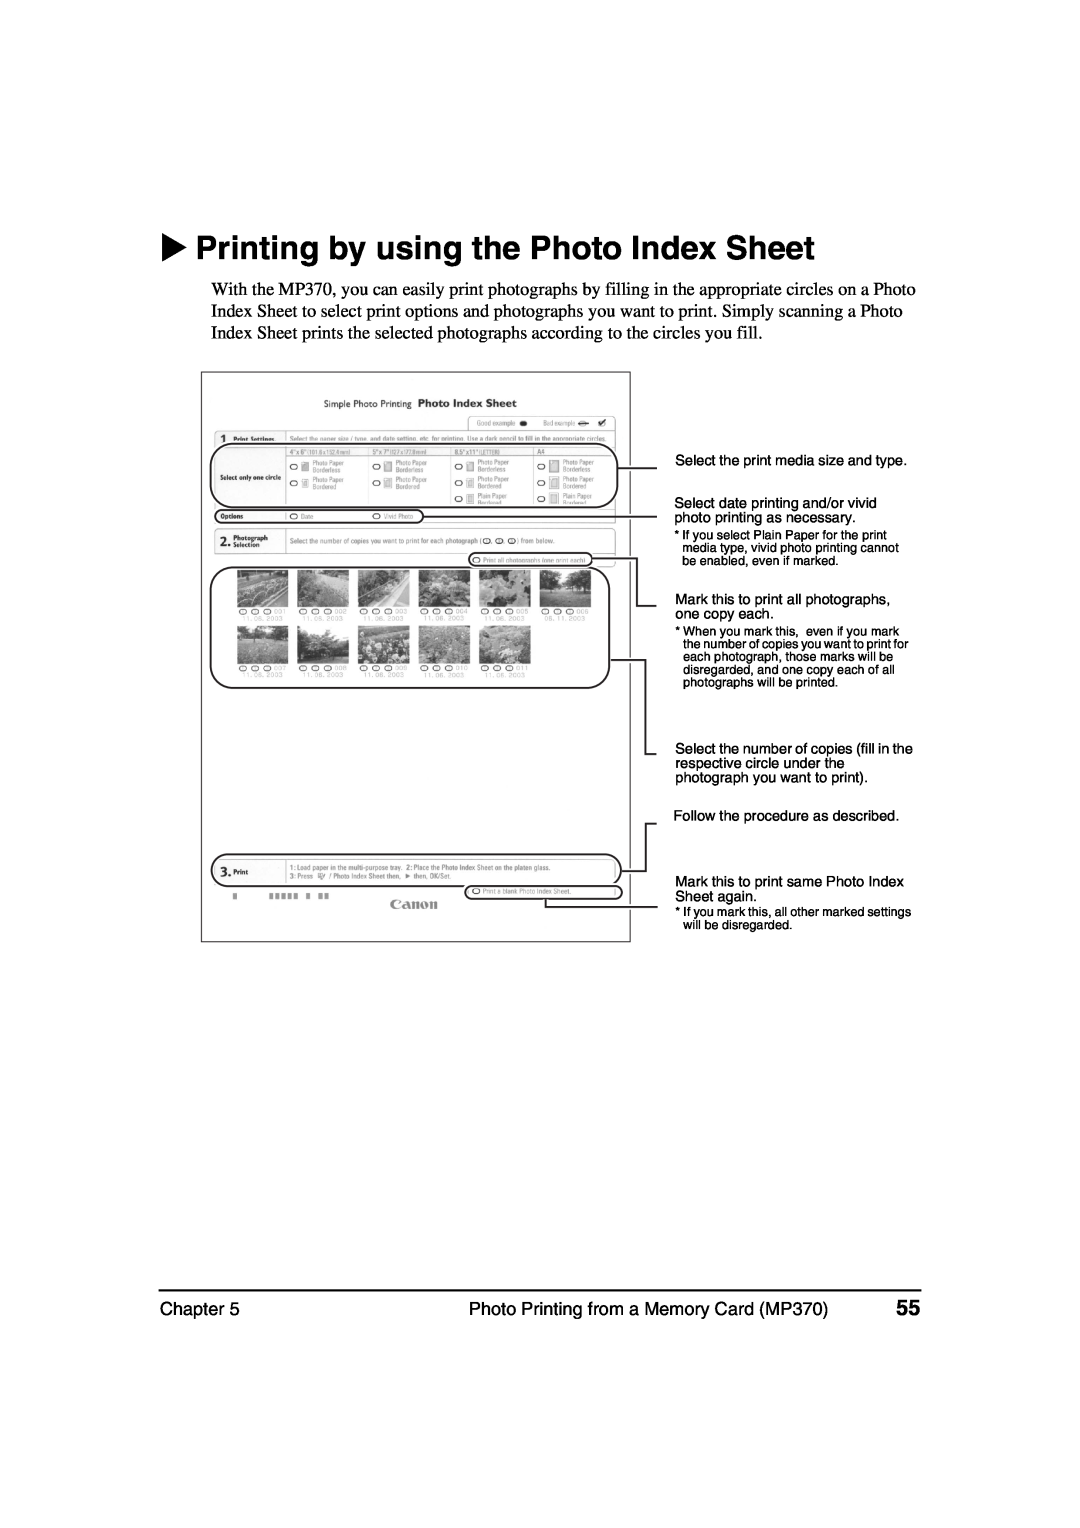 Canon MP360 manual Printing by using the Photo Index Sheet, Chapter, Photo Printing from a Memory Card MP370 